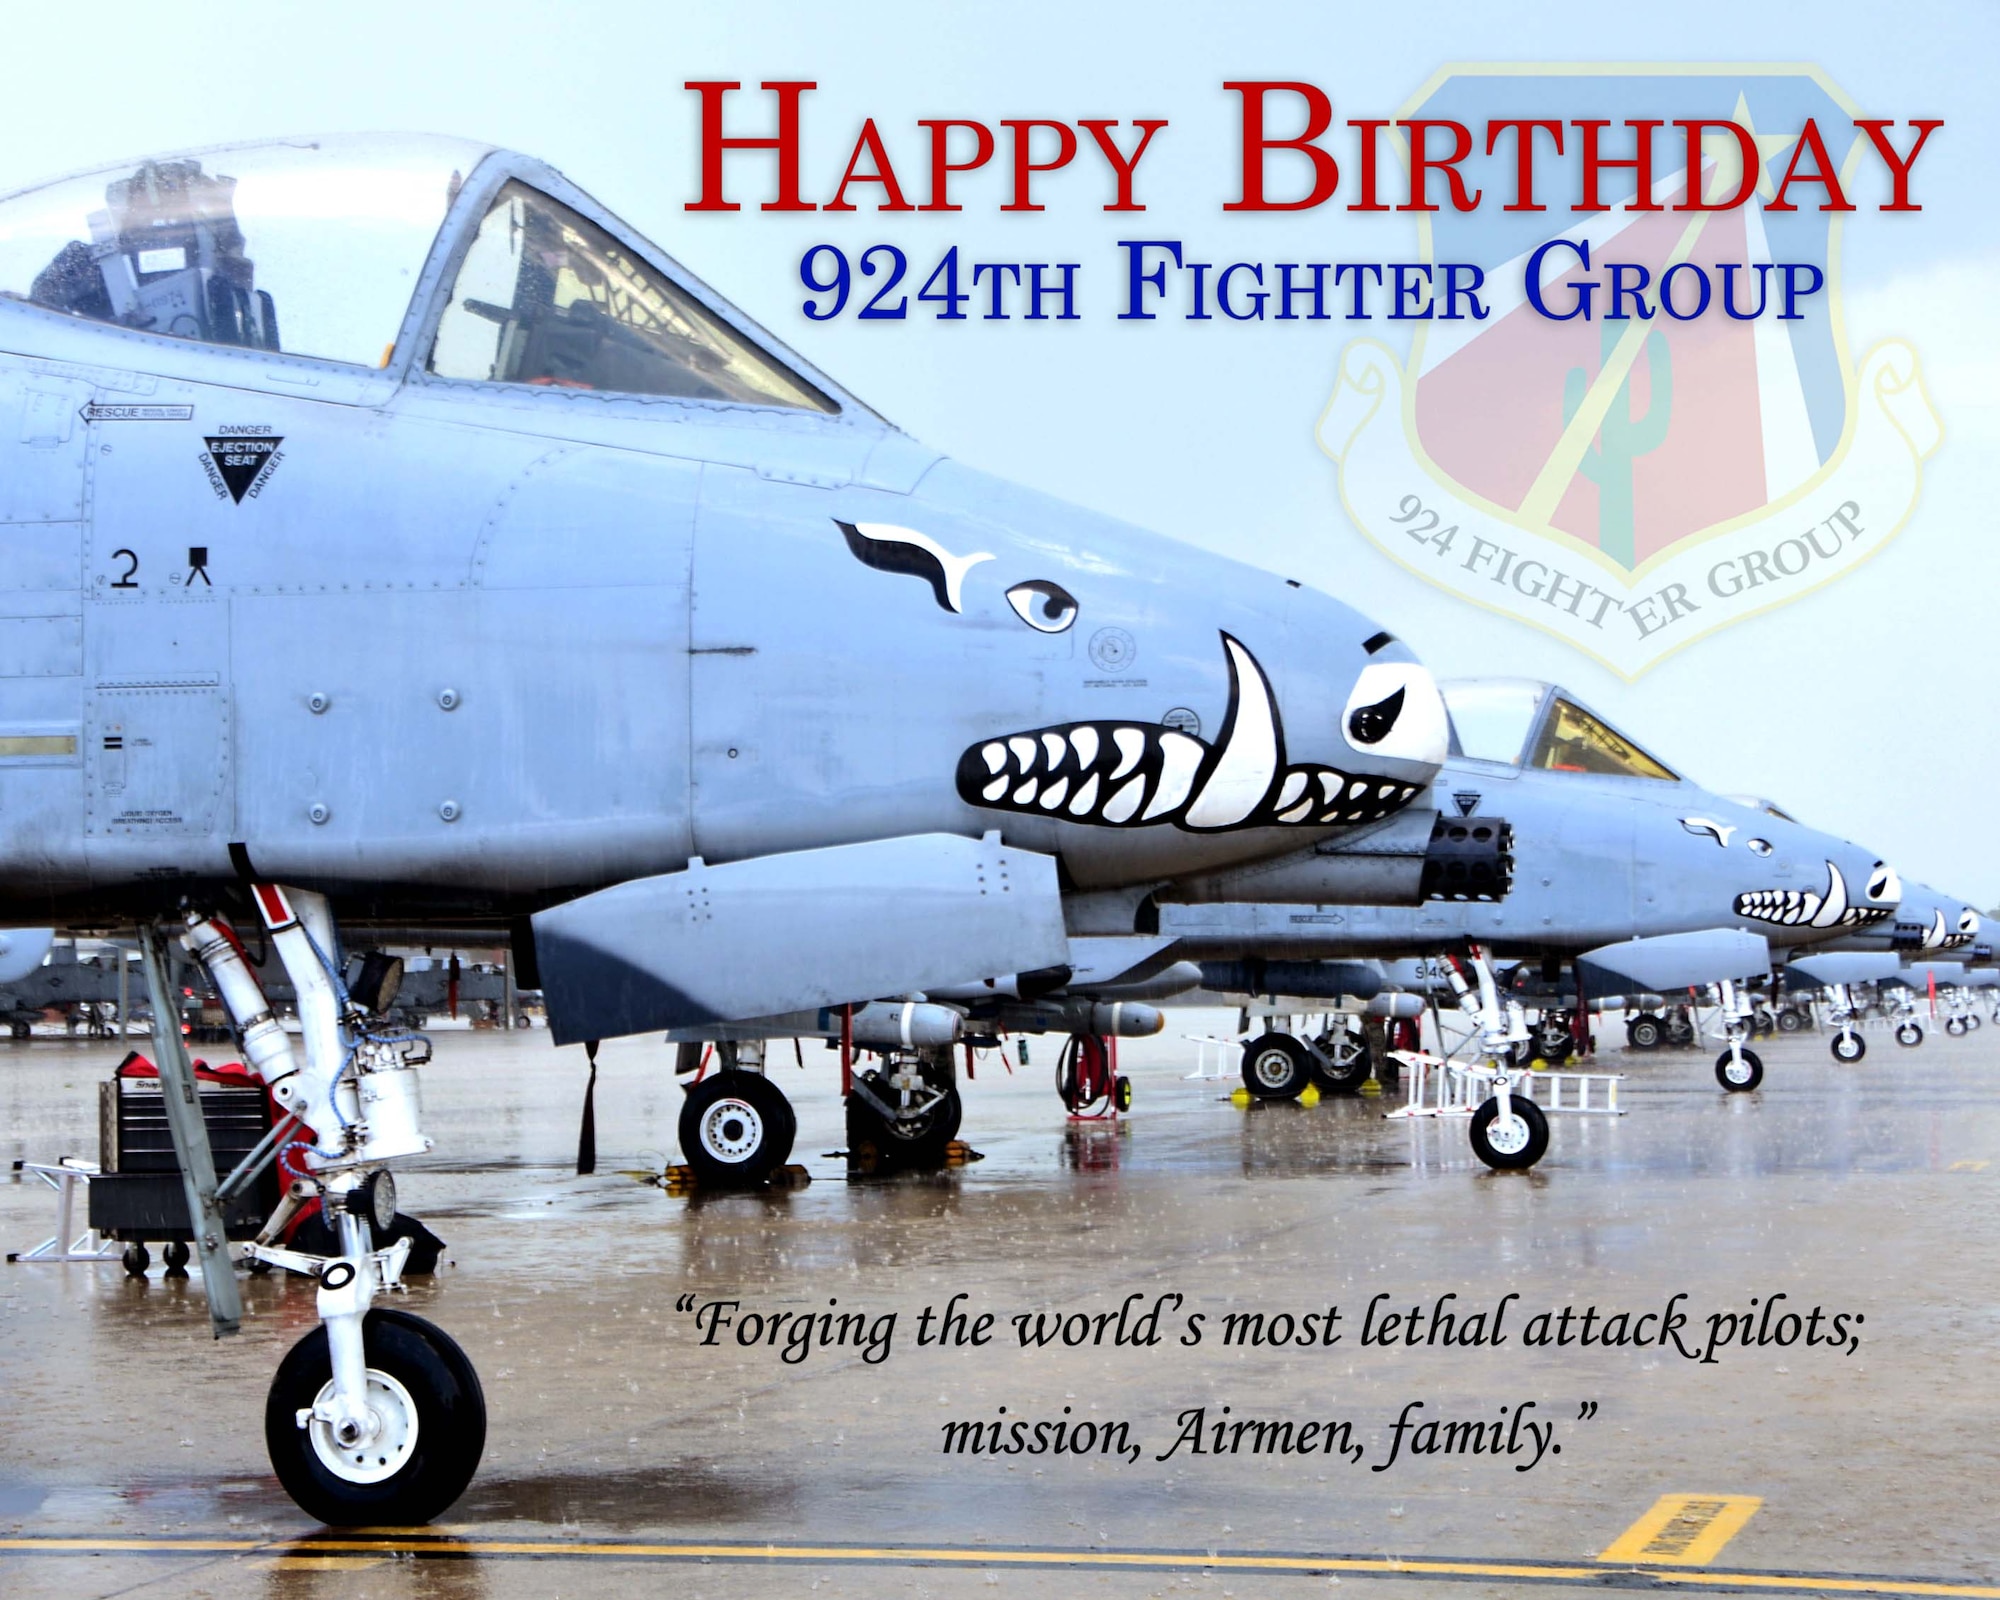 Reserve Citizen Airmen with the 924th Fighter Group at Davis-Monthan Air Force Base, Arizona, have another reason to stand proudly as the unit celebrates its 58th birthday. A geographically separated unit of the 944th Fighter Wing at Luke Air Force Base since 2012, the mission of the 924th FG is to forge the world’s most lethal A-10 Thunderbolt II attack pilots.